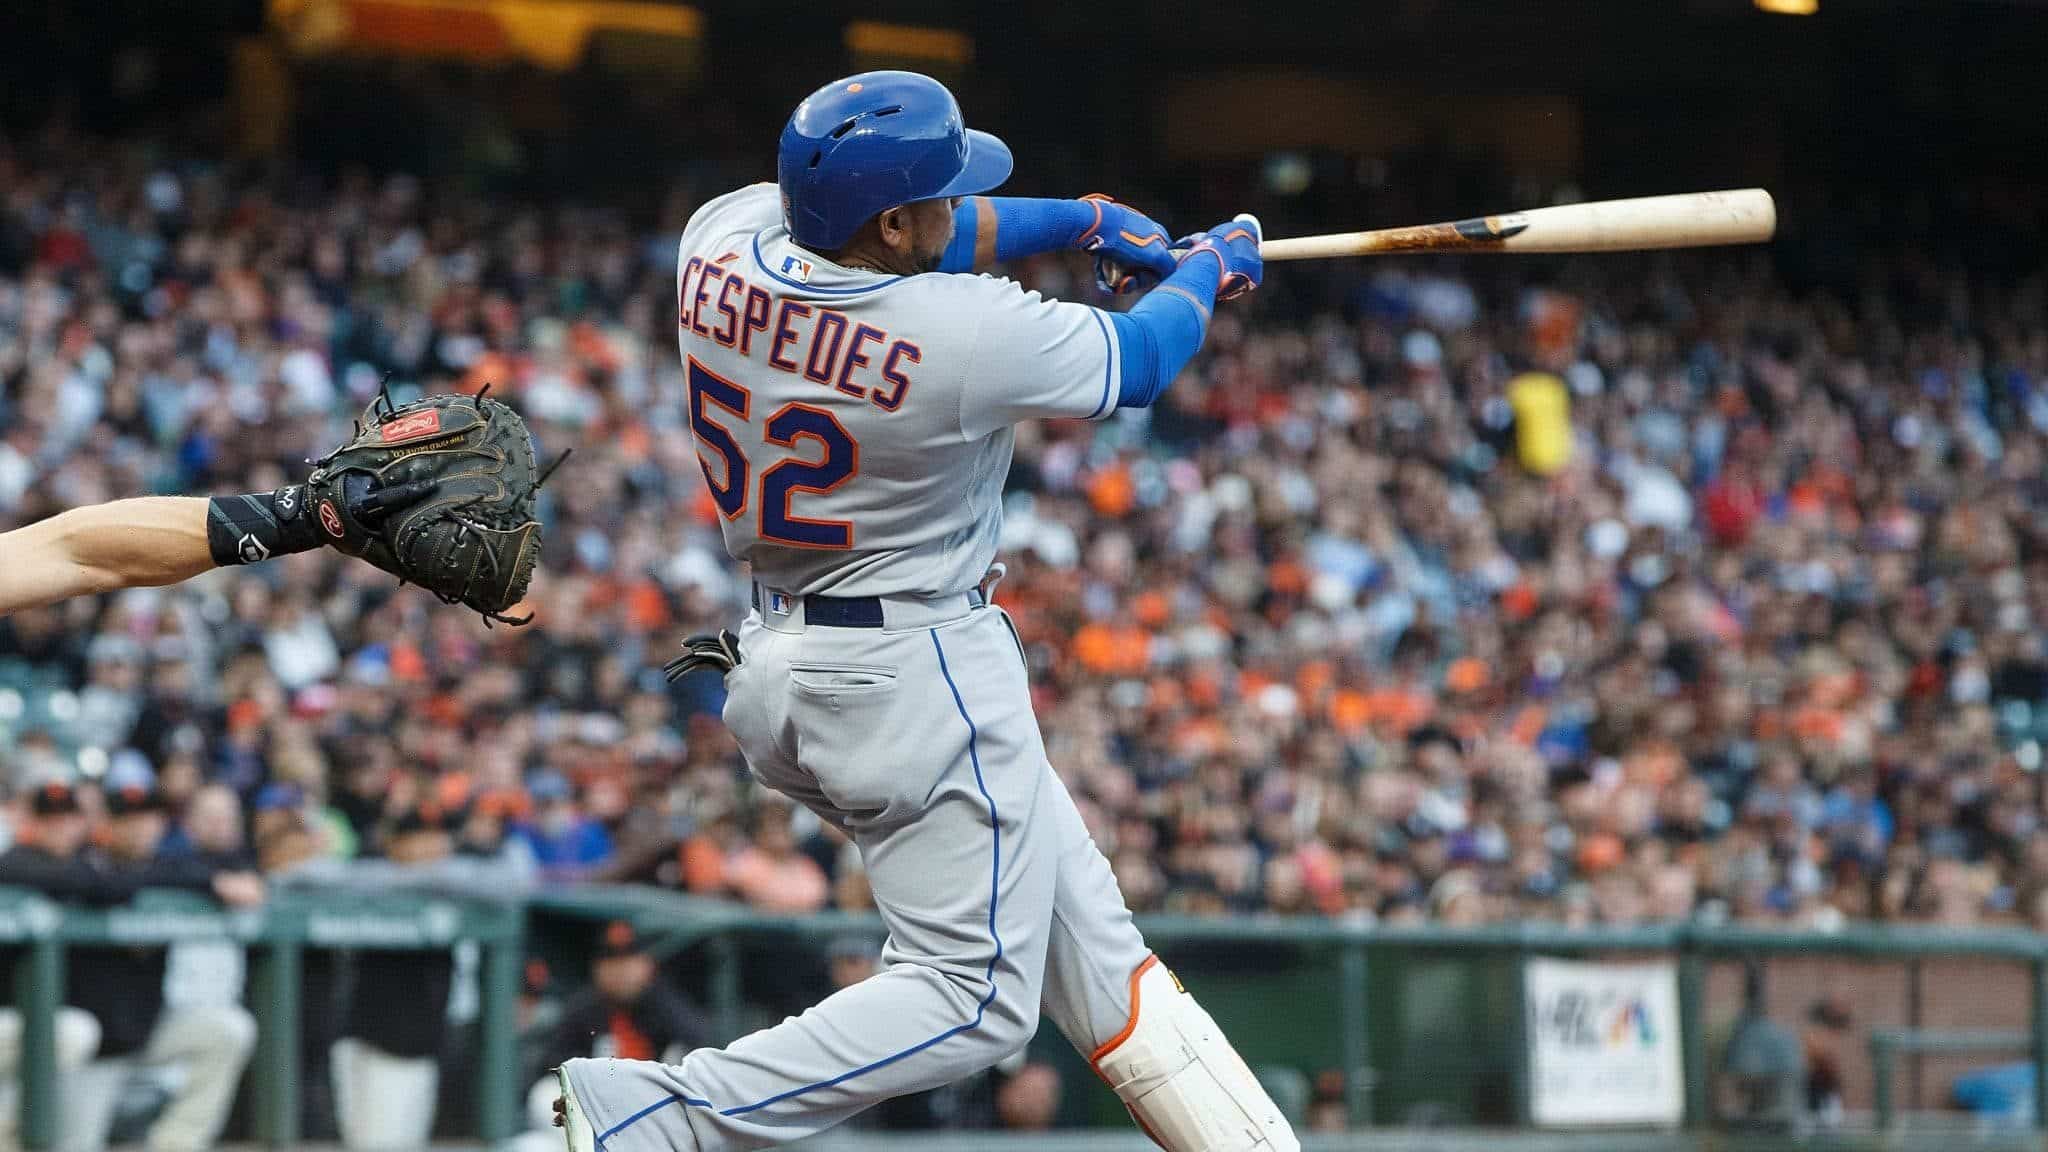 SAN FRANCISCO, CA - JUNE 23: Yoenis Cespedes #52 of the New York Mets hits a two run home run against the San Francisco Giants during the second inning at AT&T Park on June 23, 2017 in San Francisco, California.